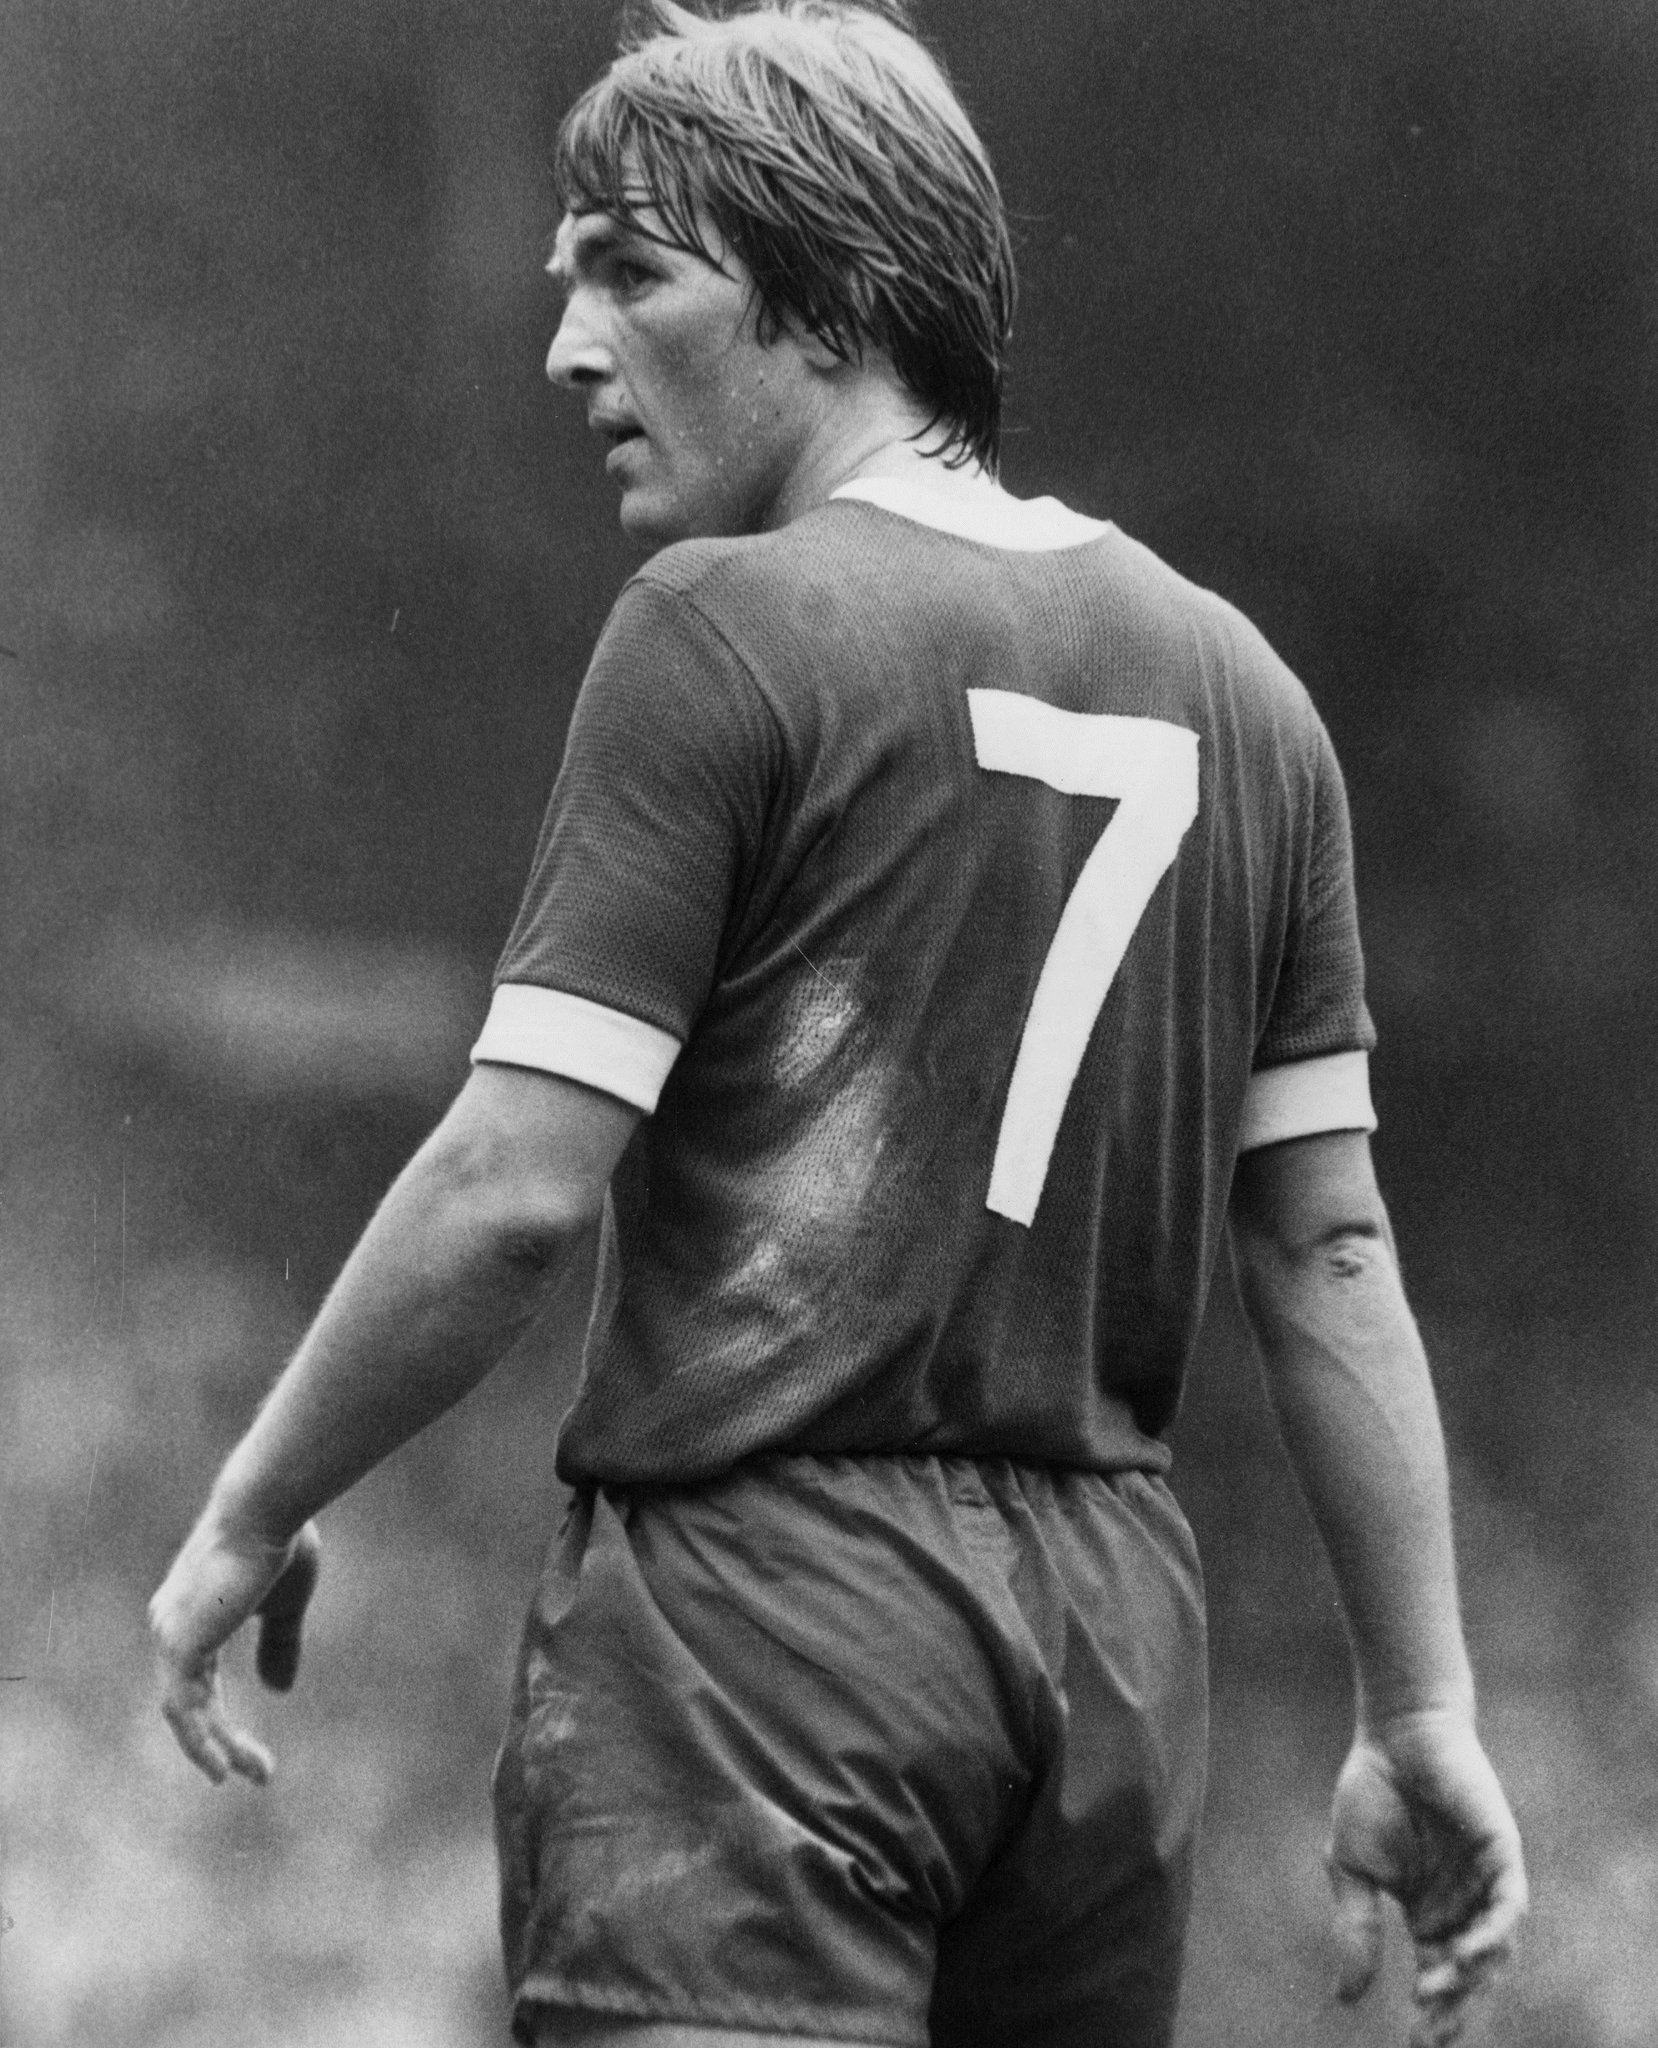 With Kenny Dalglish on the ball. He was the greatest of them all! Happy birthday  